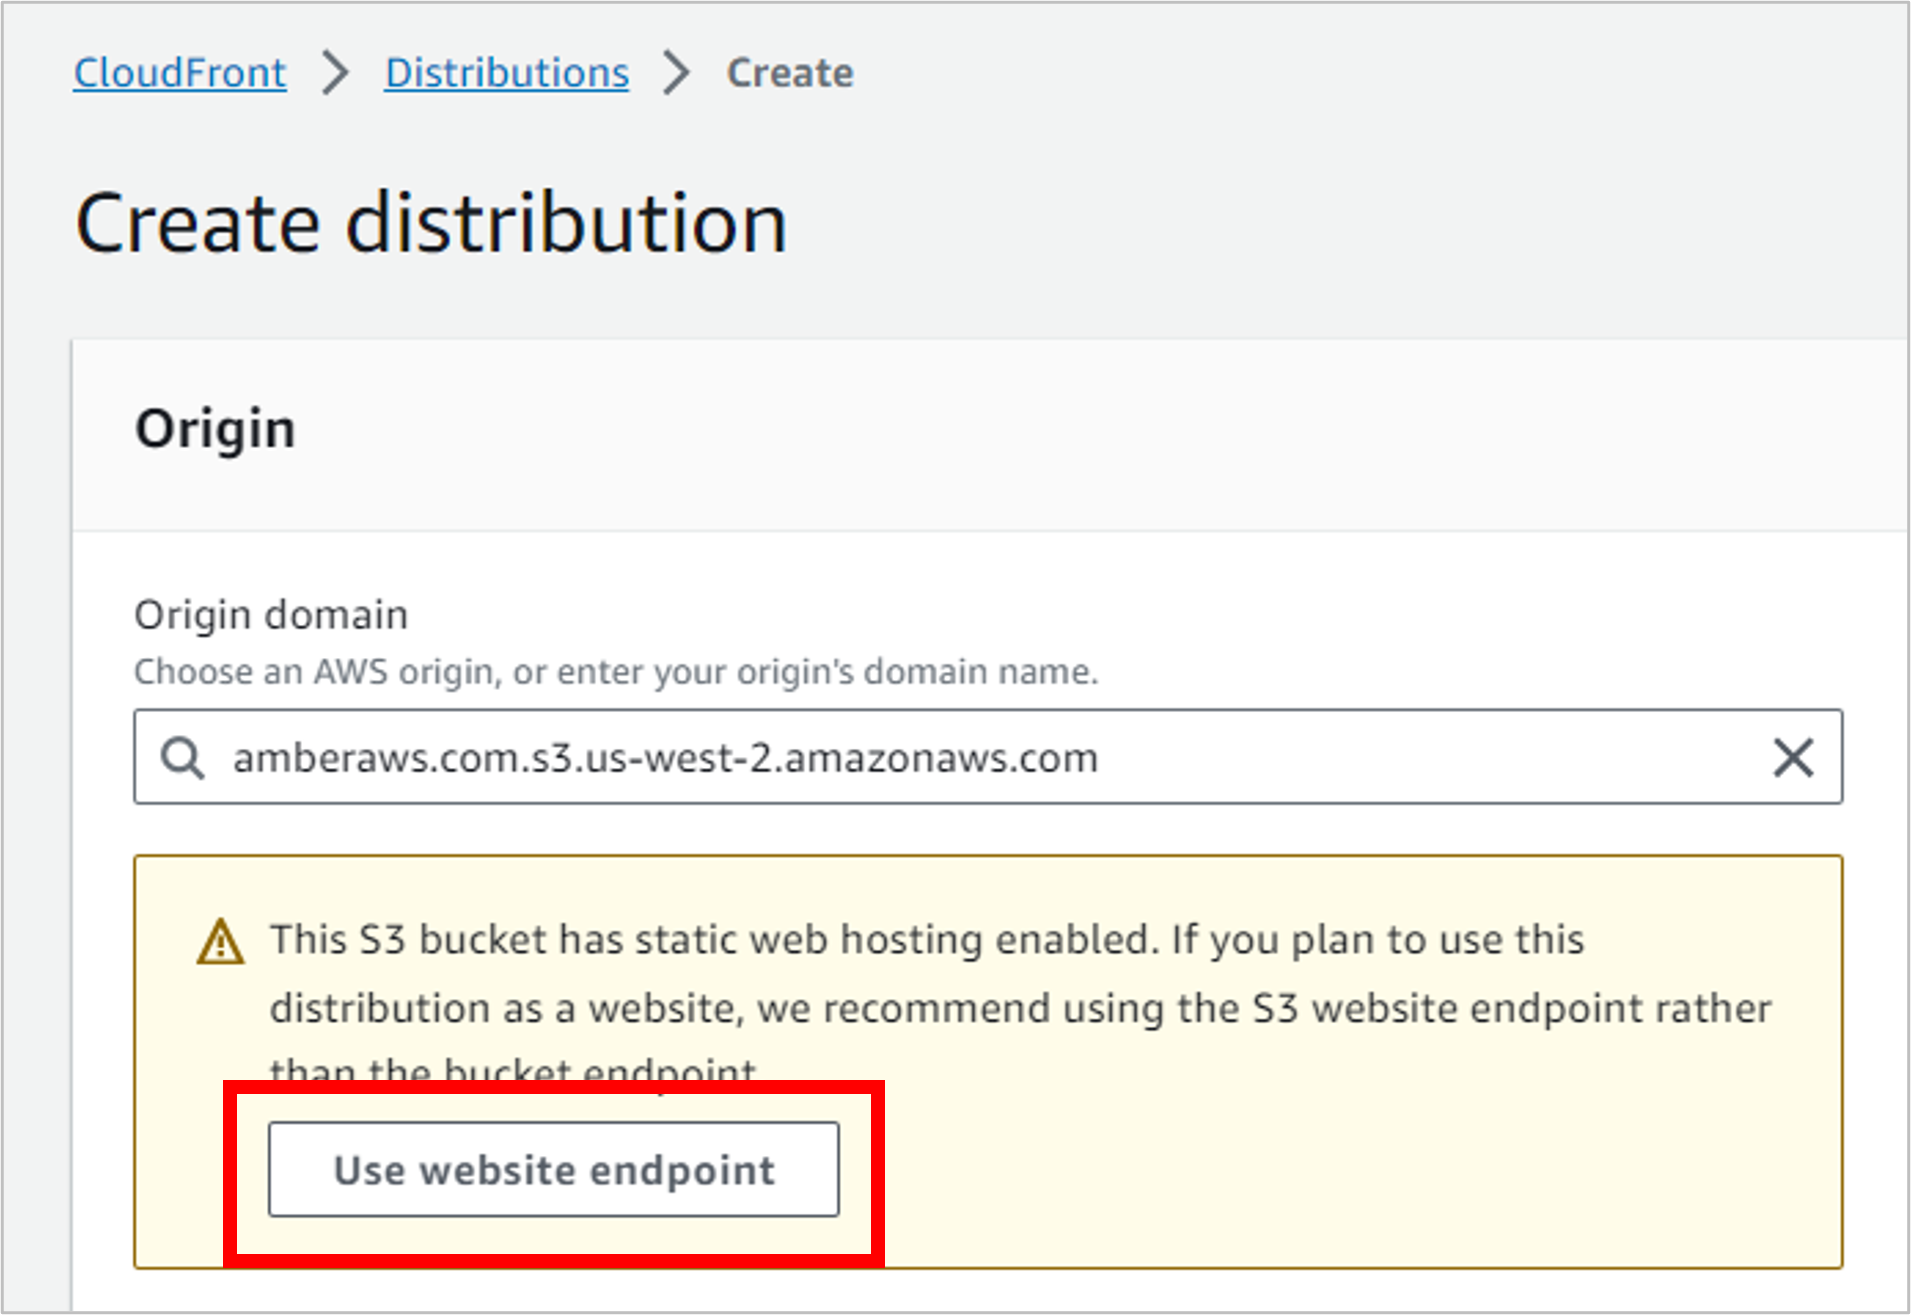 Website-endpoint-not-bucket-endpoint